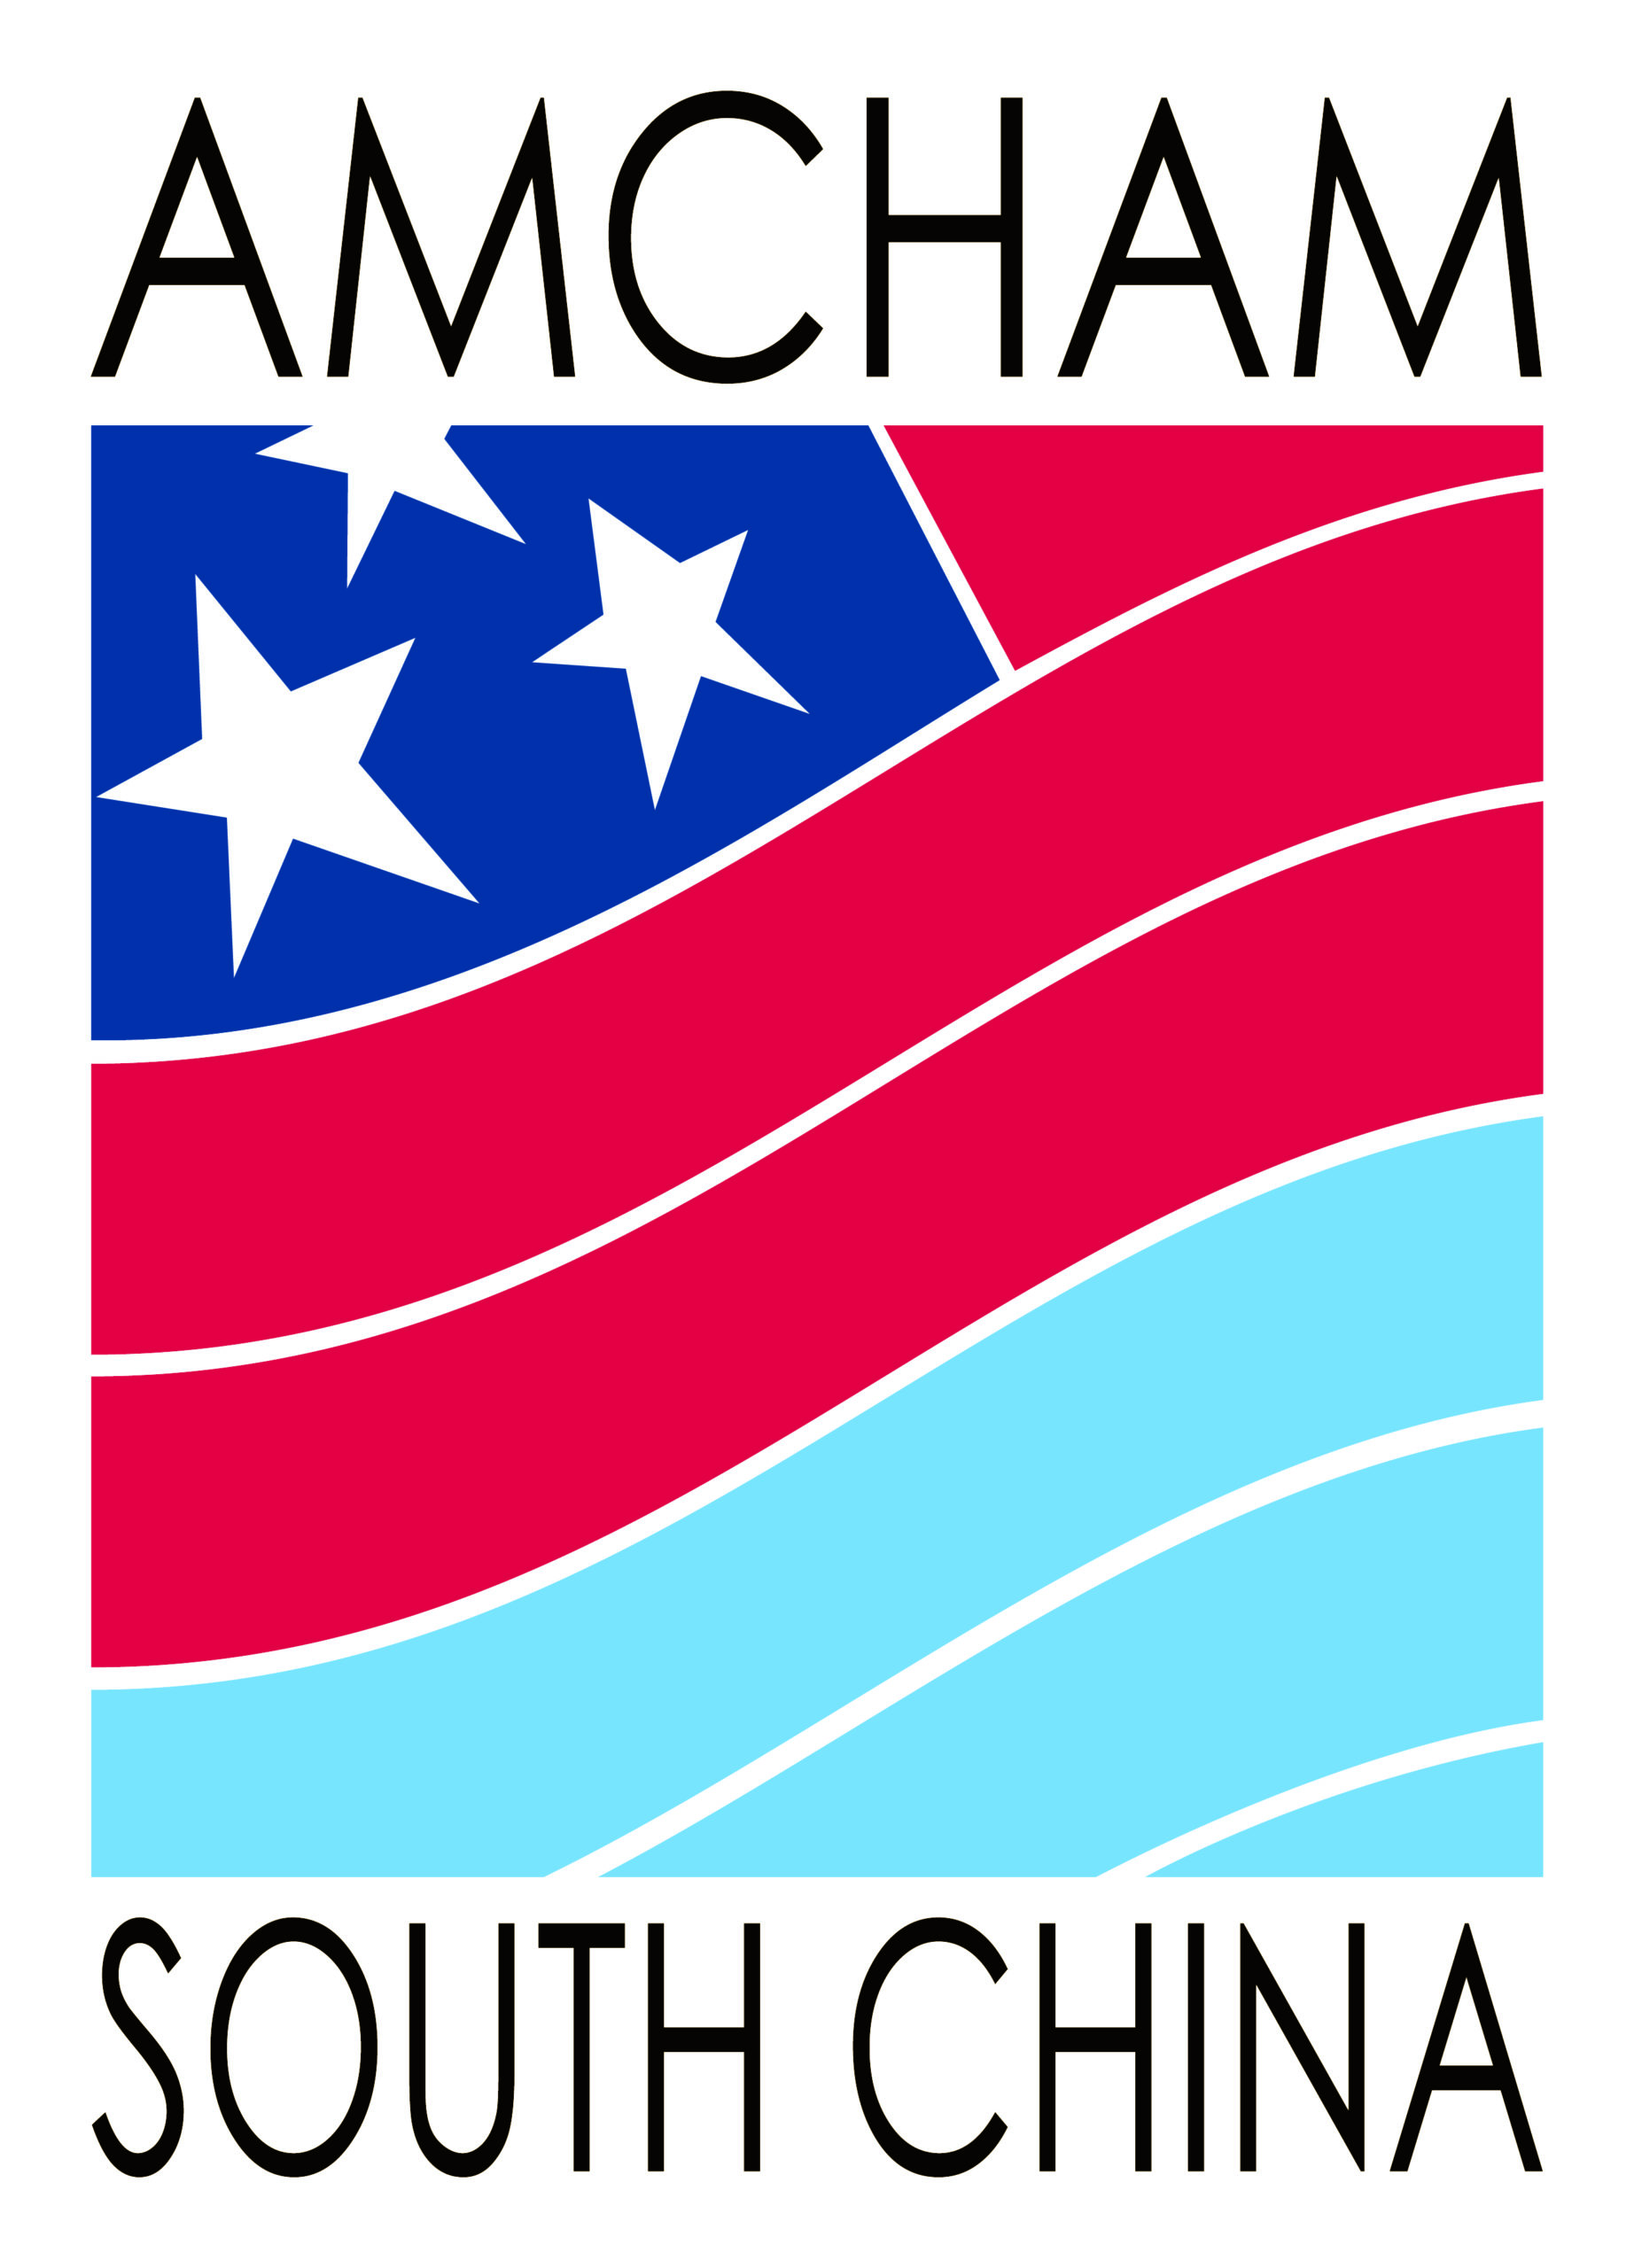 Featured image for “The American Chamber of Commerce in South China”